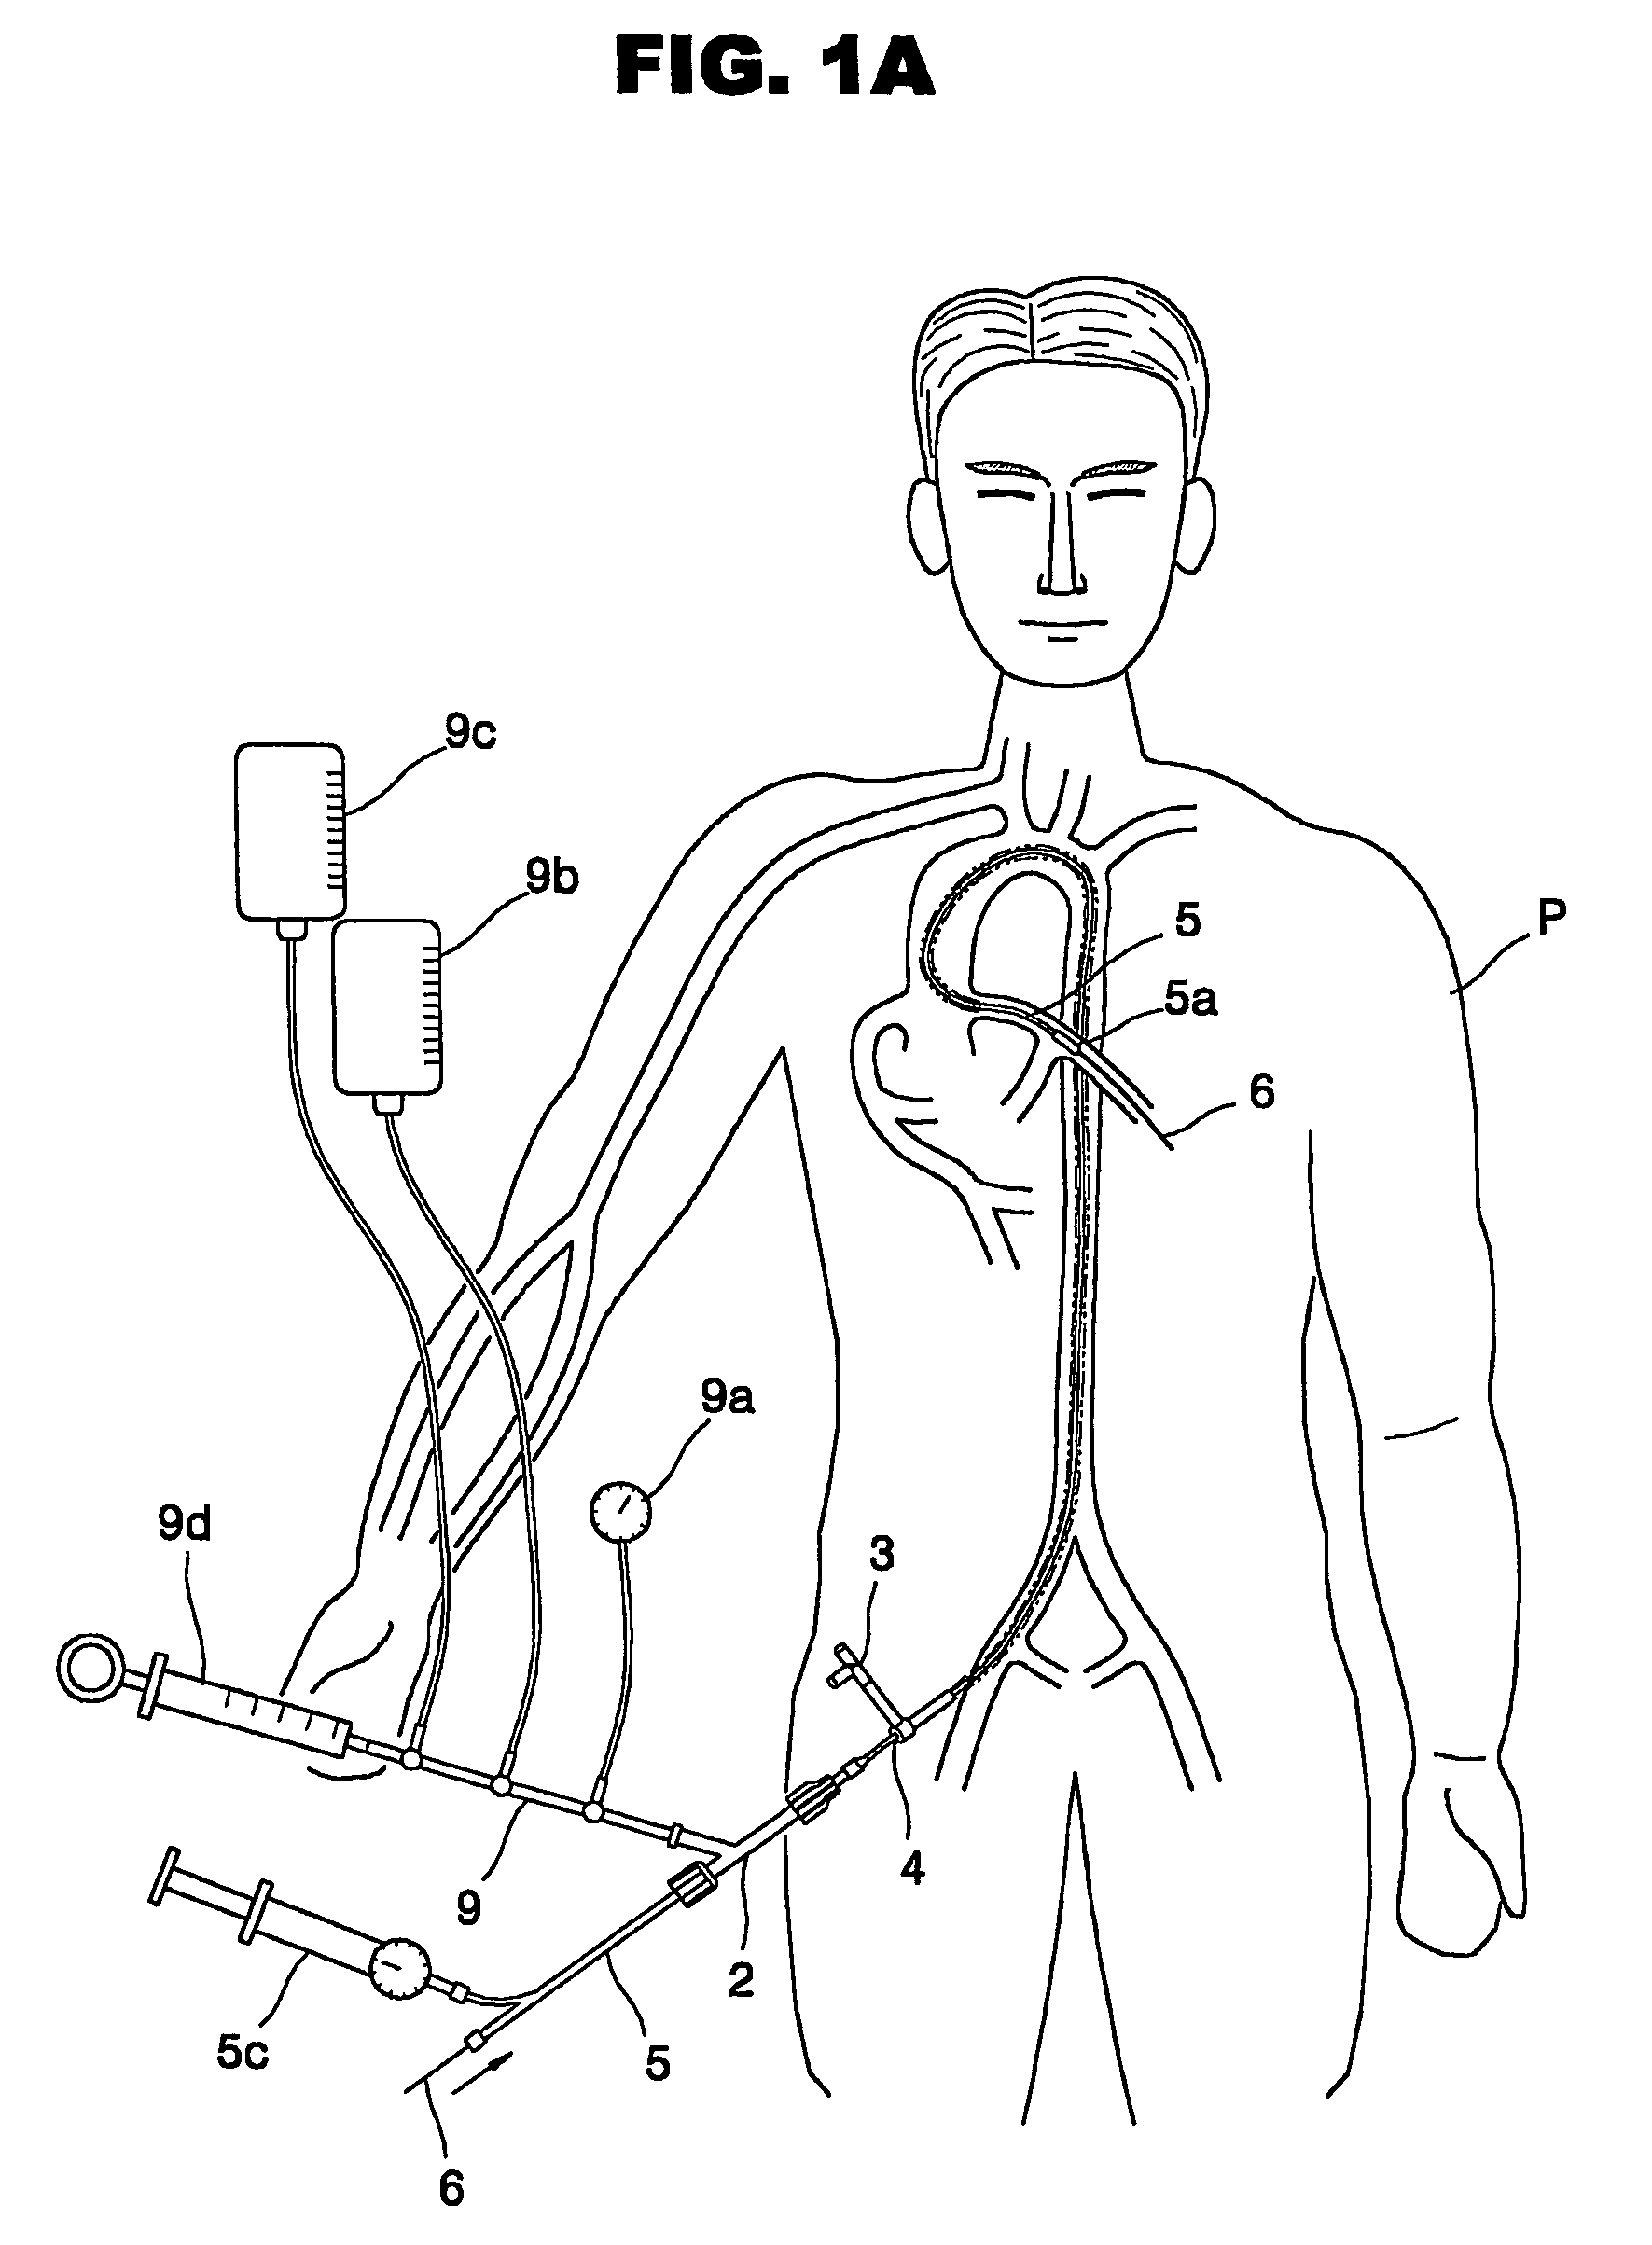 Catheter apparatus for percutaneous coronary intervention capable of accurately positioning stent and balloon in a desired position